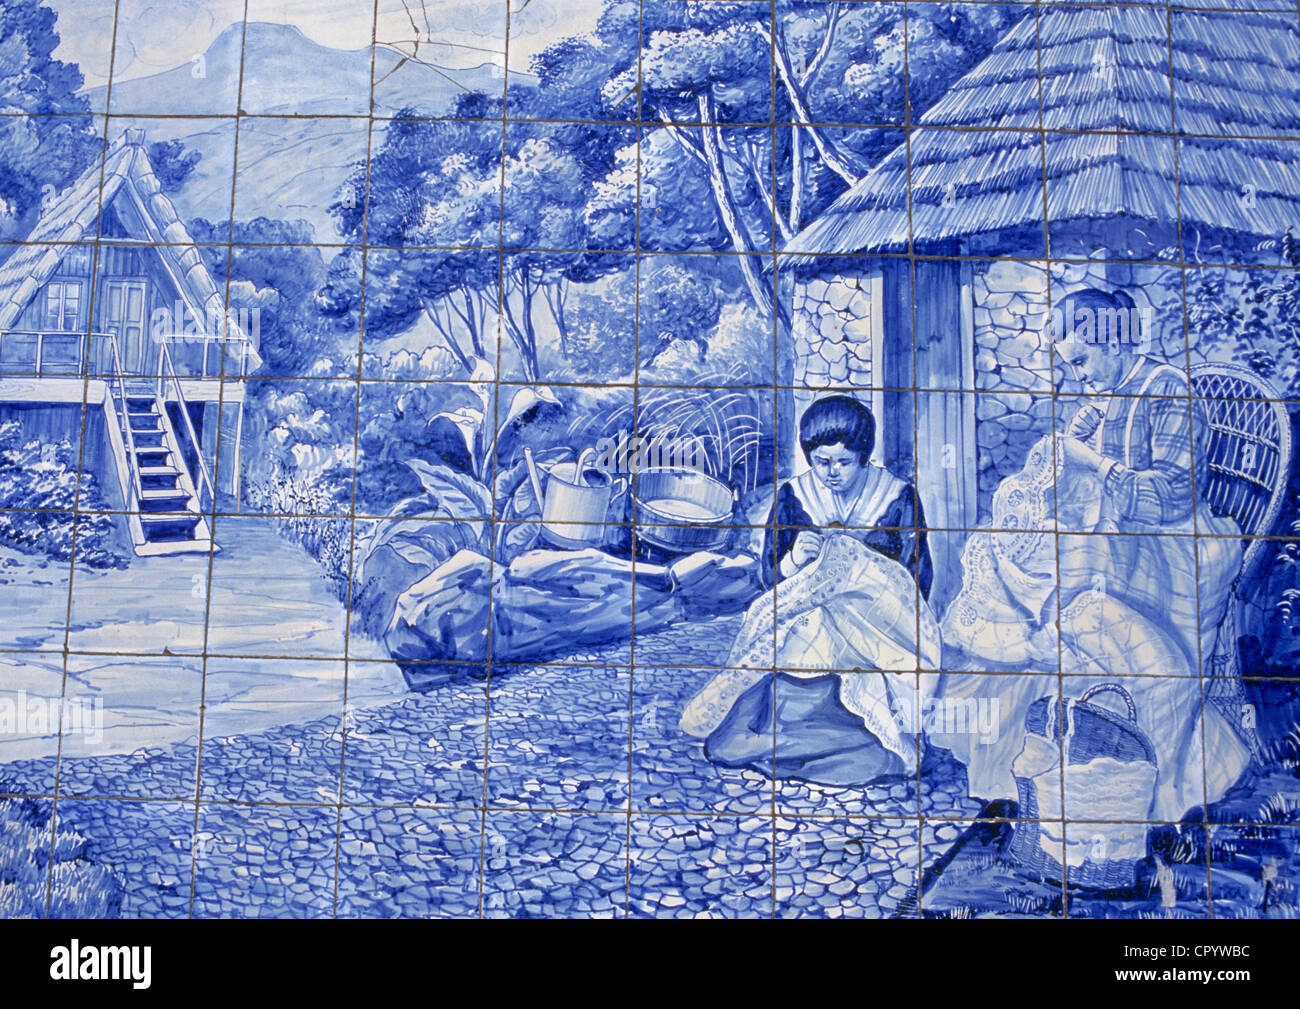 Portugal, Madeira Island, Funchal, Azulejo in the streets Stock Photo